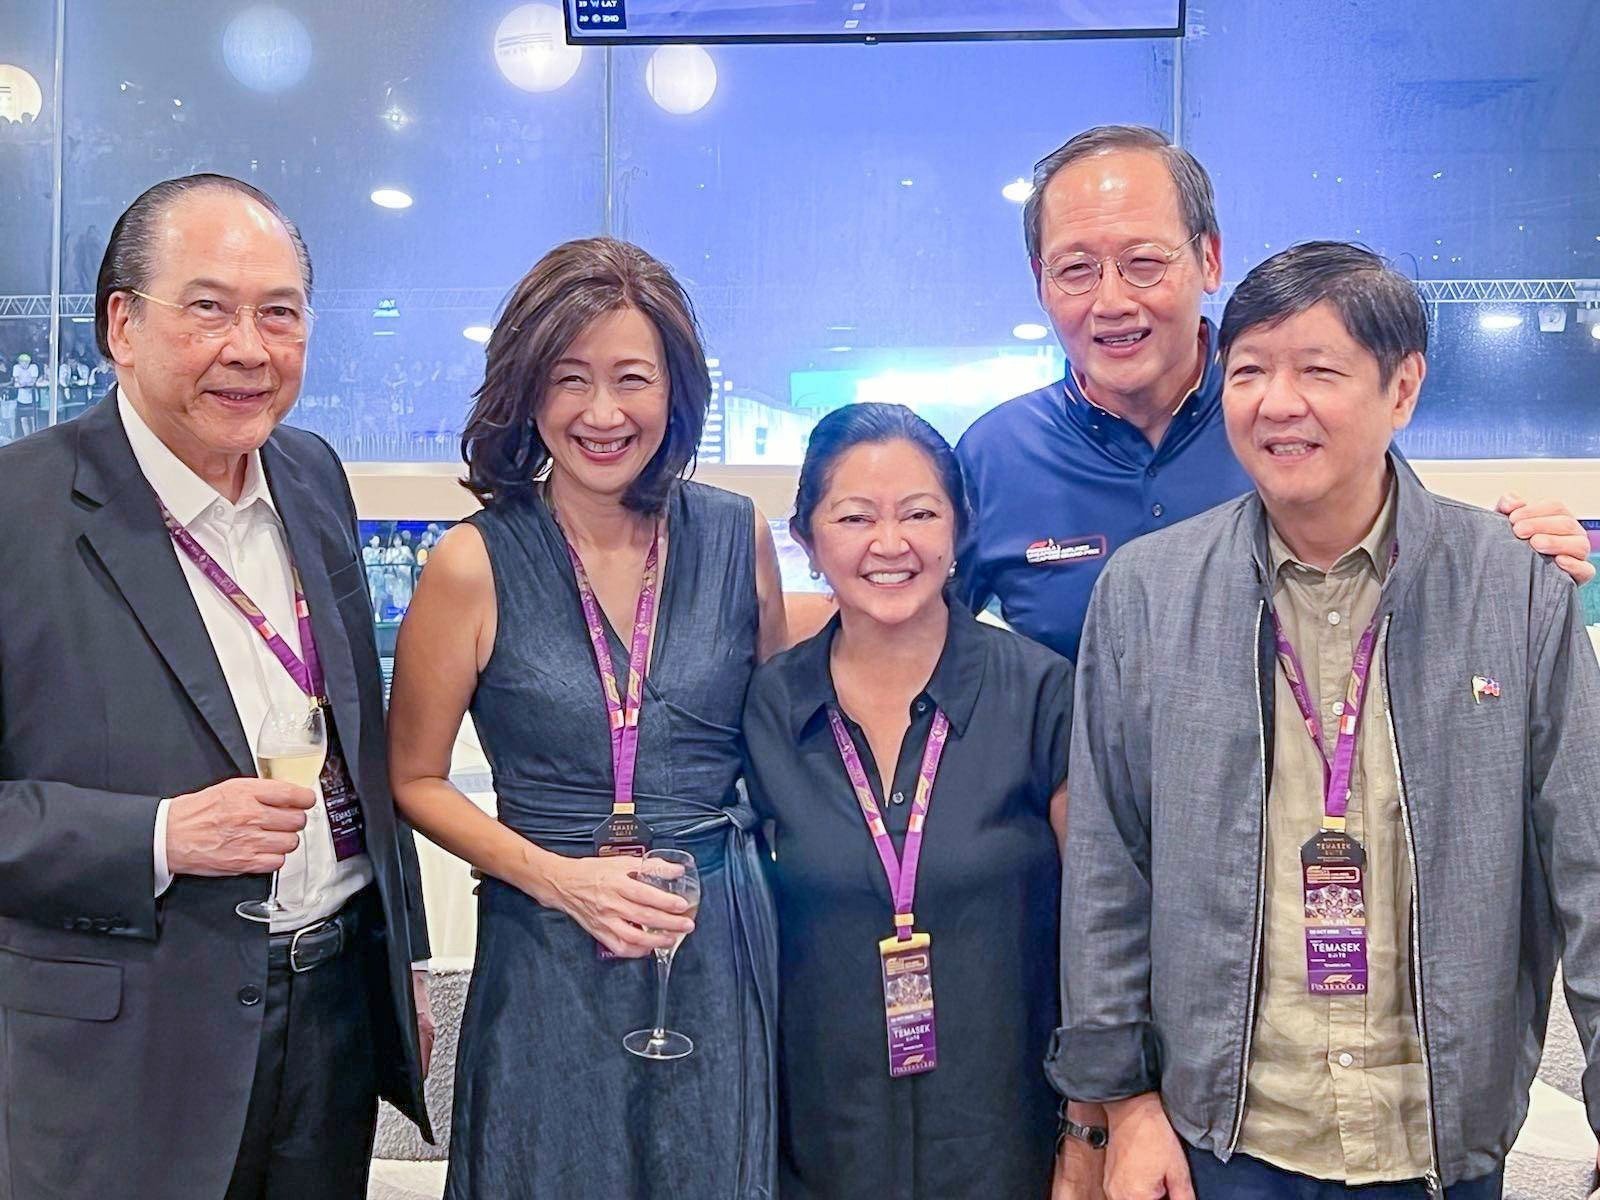 Philippine President Ferdinand Marcos Jnr (far right) meets VIPs at the F1 race in Singapore on October 3, 2022. Photo: Facebook